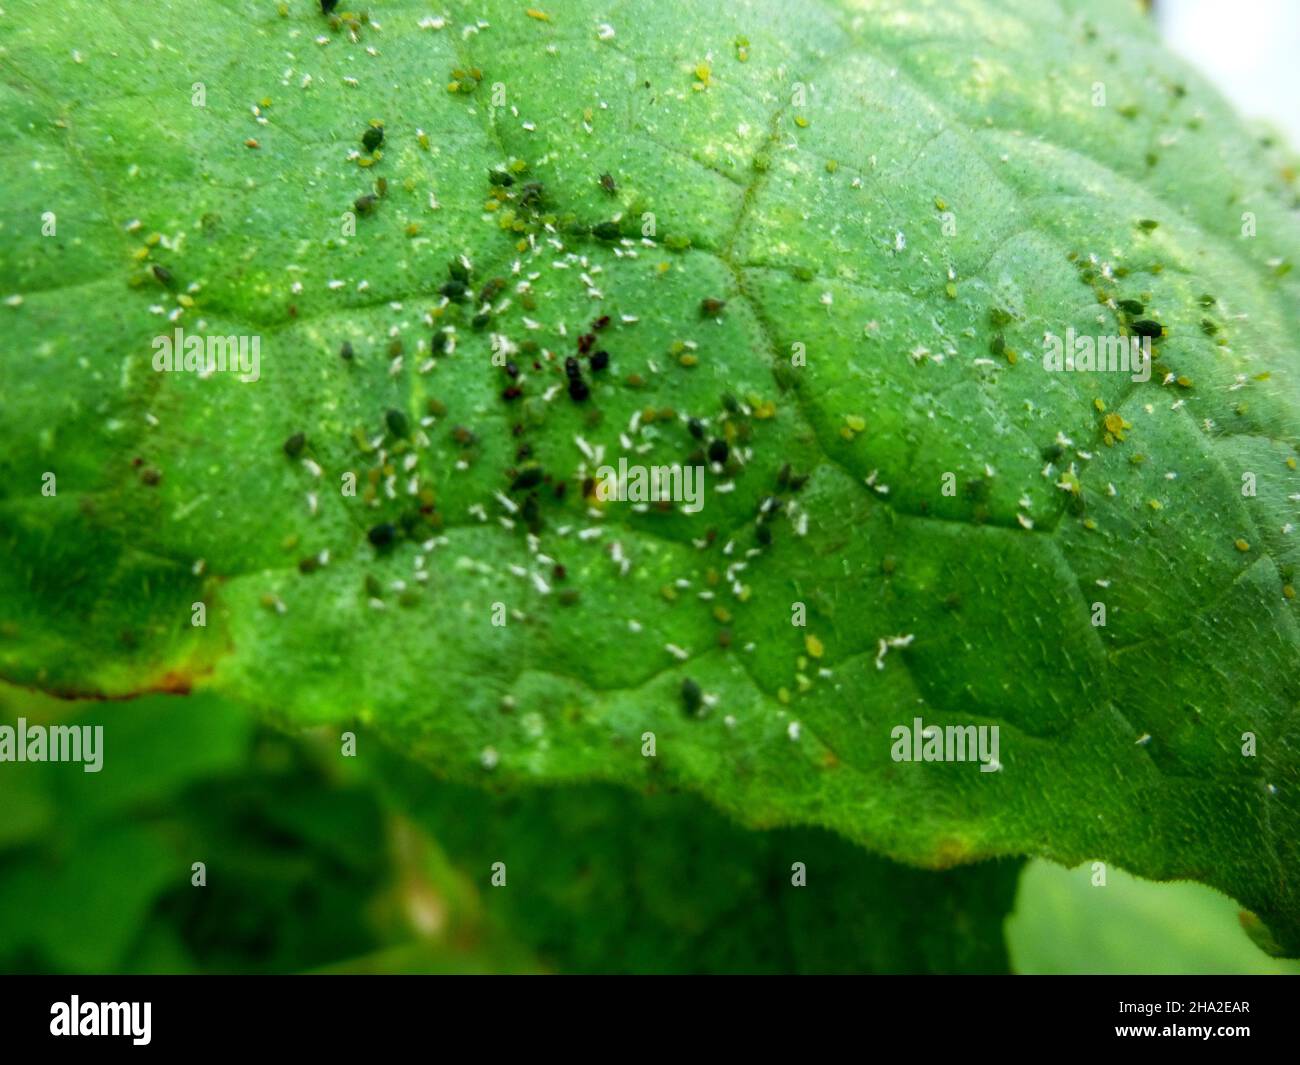 Insect pests, aphids, on the leaves and fruits of plants. Cucumber attacked by harmful insects Stock Photo